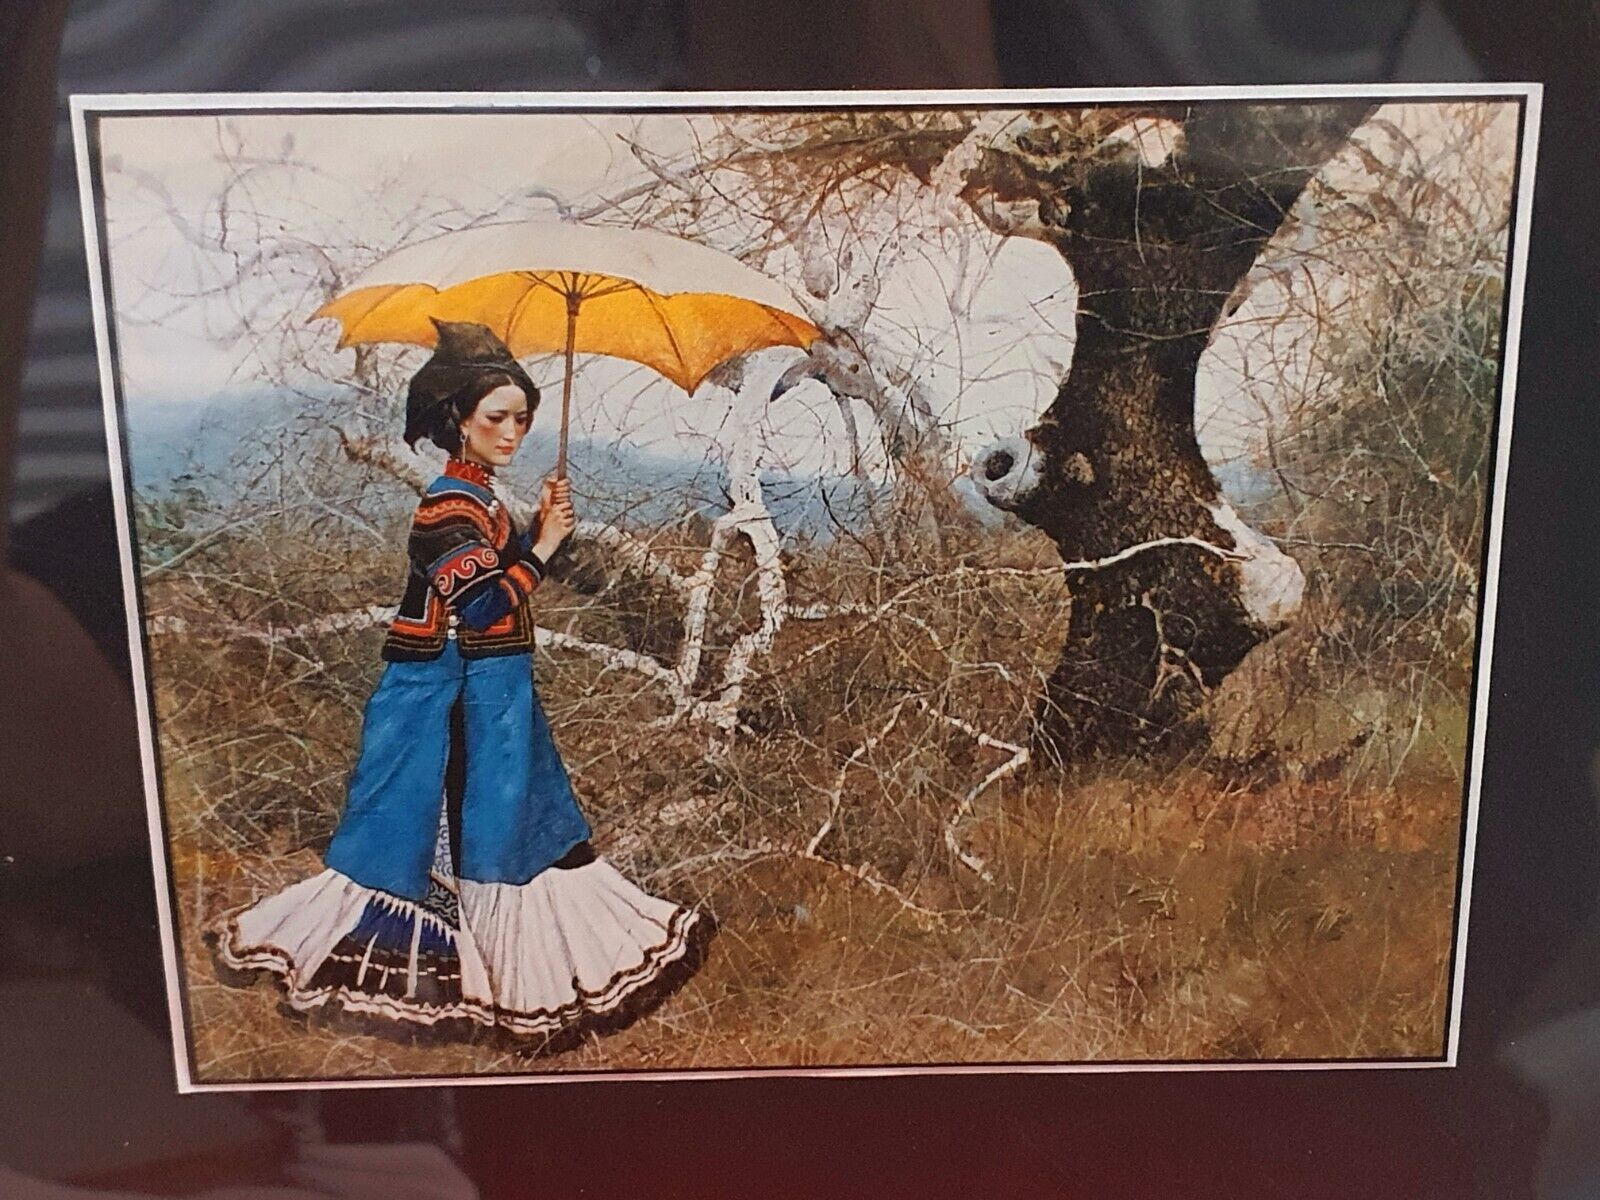 Chinese Artist Gao Xiao-Hua Reproduction Prints of Paintings of Yi Ethnic Group Без бренда - фотография #4